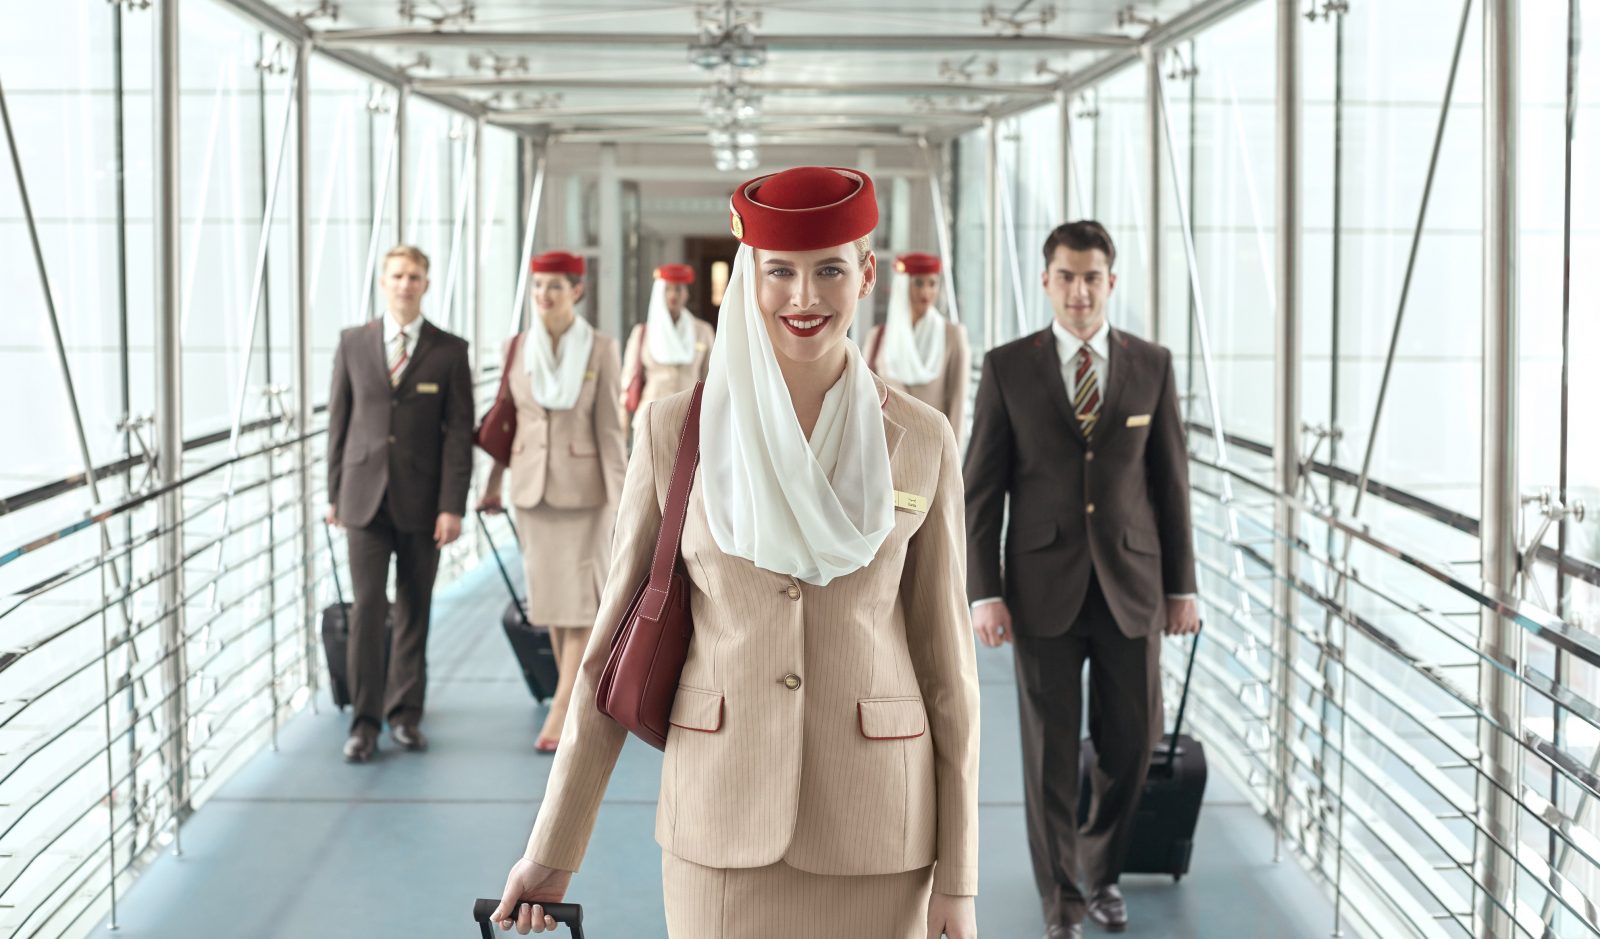 Should Emirates Do More to Look After its Cabin Crew